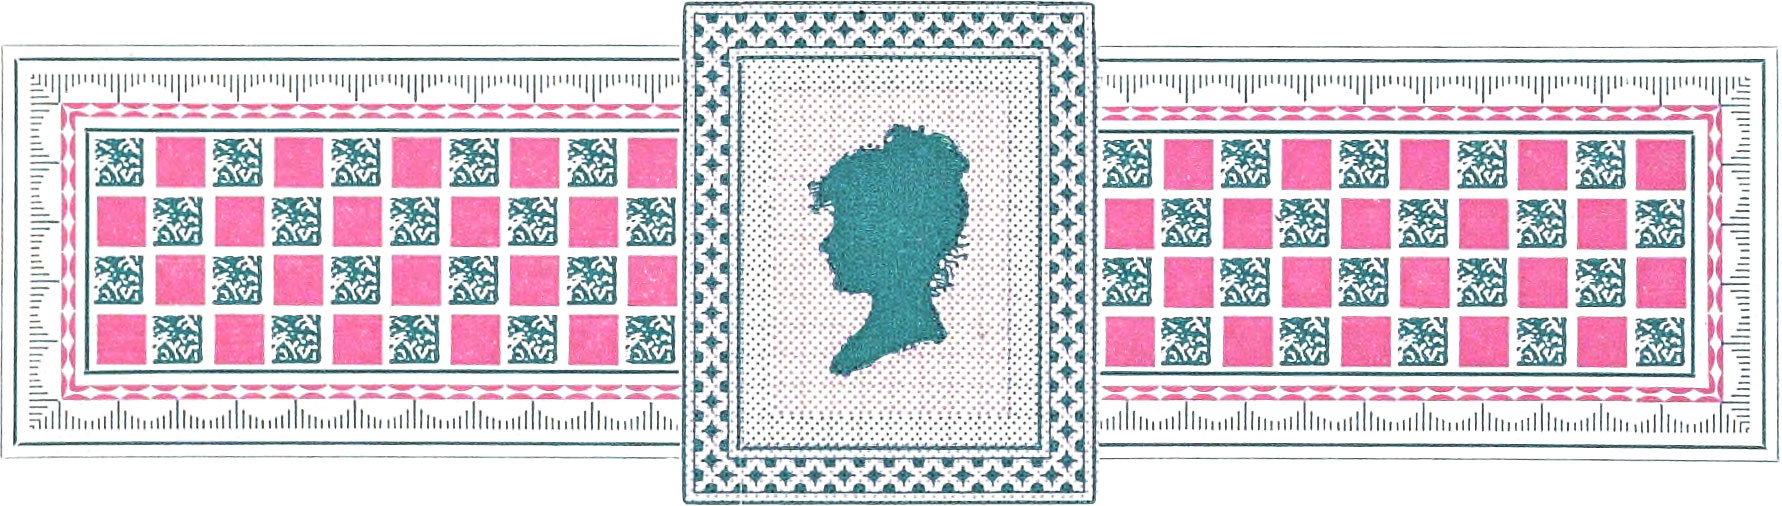 Checkered border with a female silhouette in the middle surrounded by a border comprising teal and pink colors